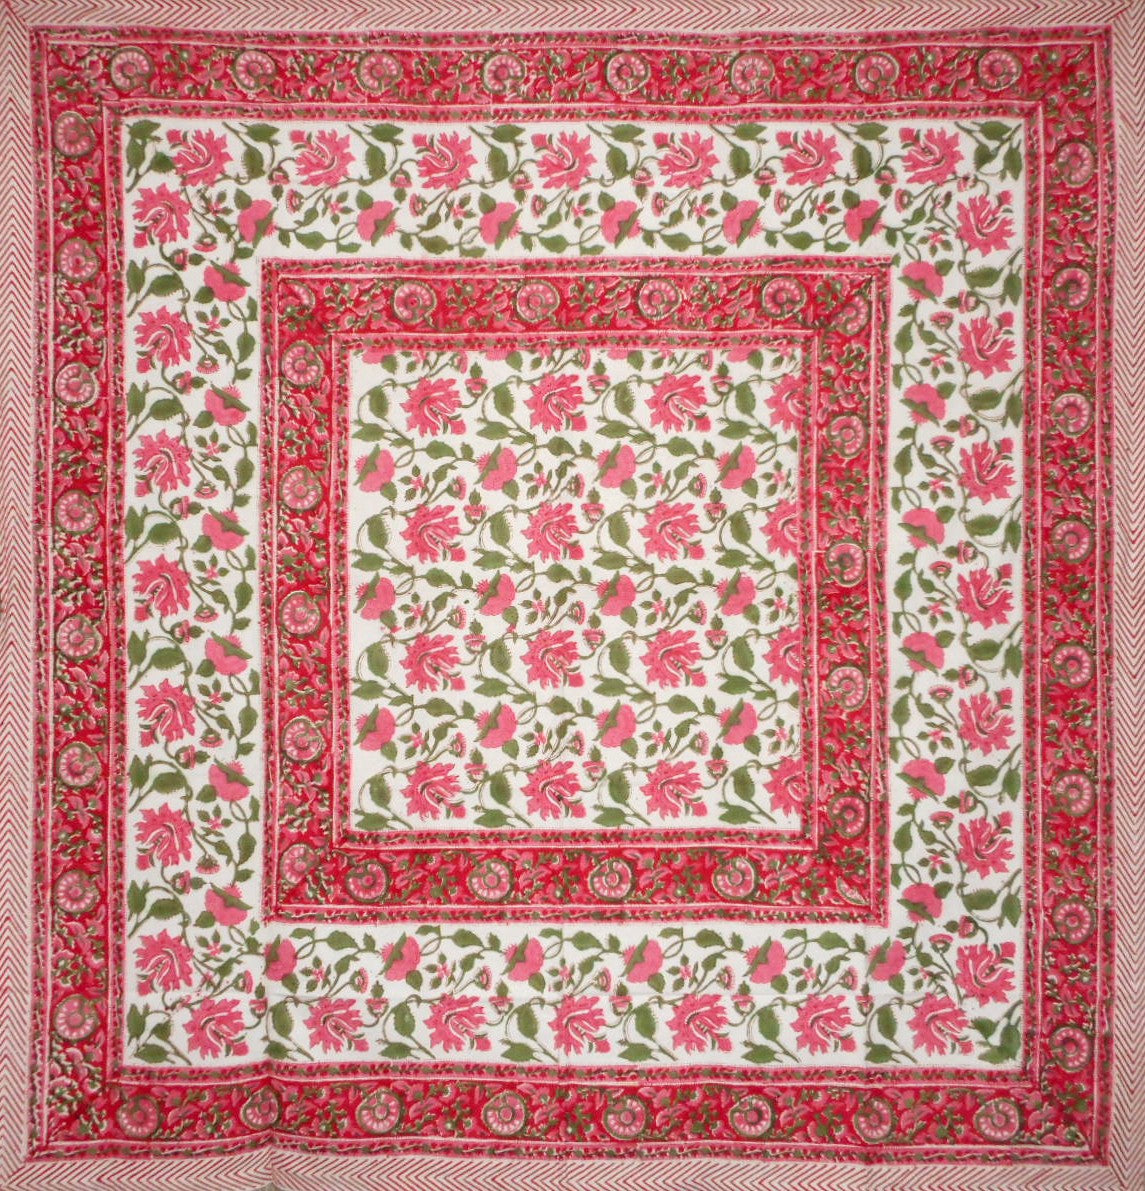 Pretty in Pink Block Print Square Cotton Tablecloth 60" x 60" Pink